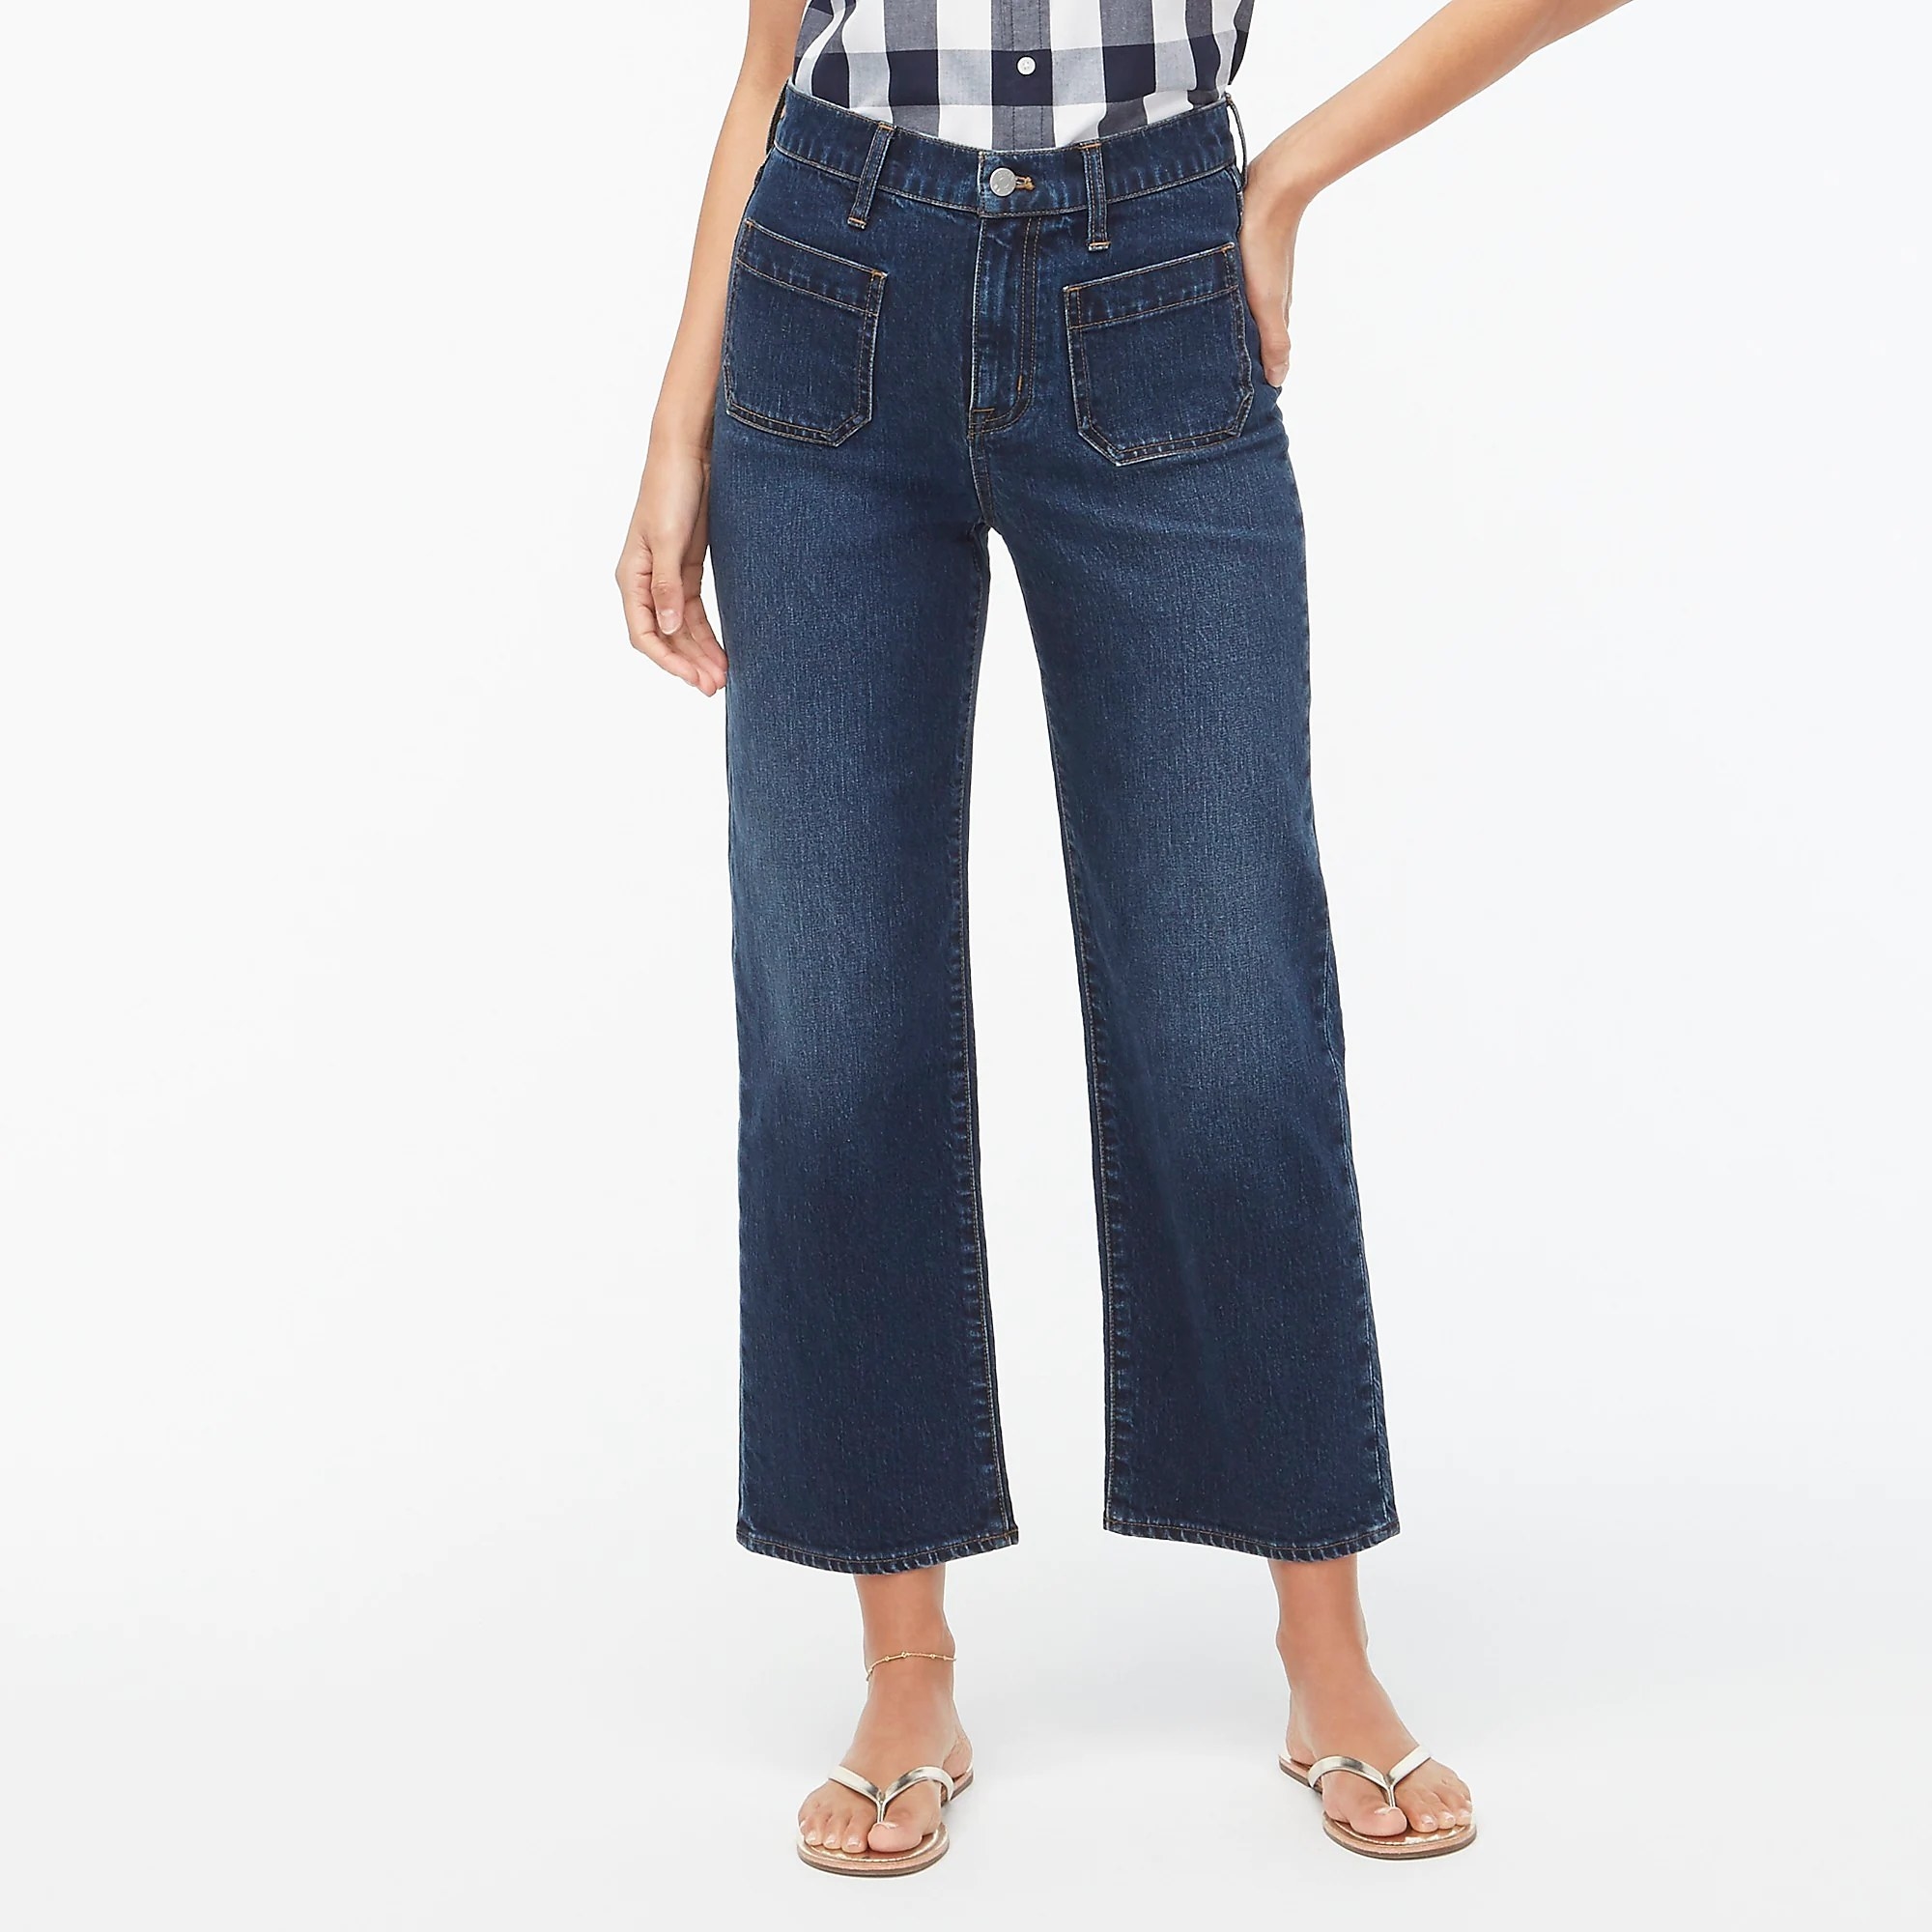 The jeans with patch pockets on the front and an increasingly wide leg